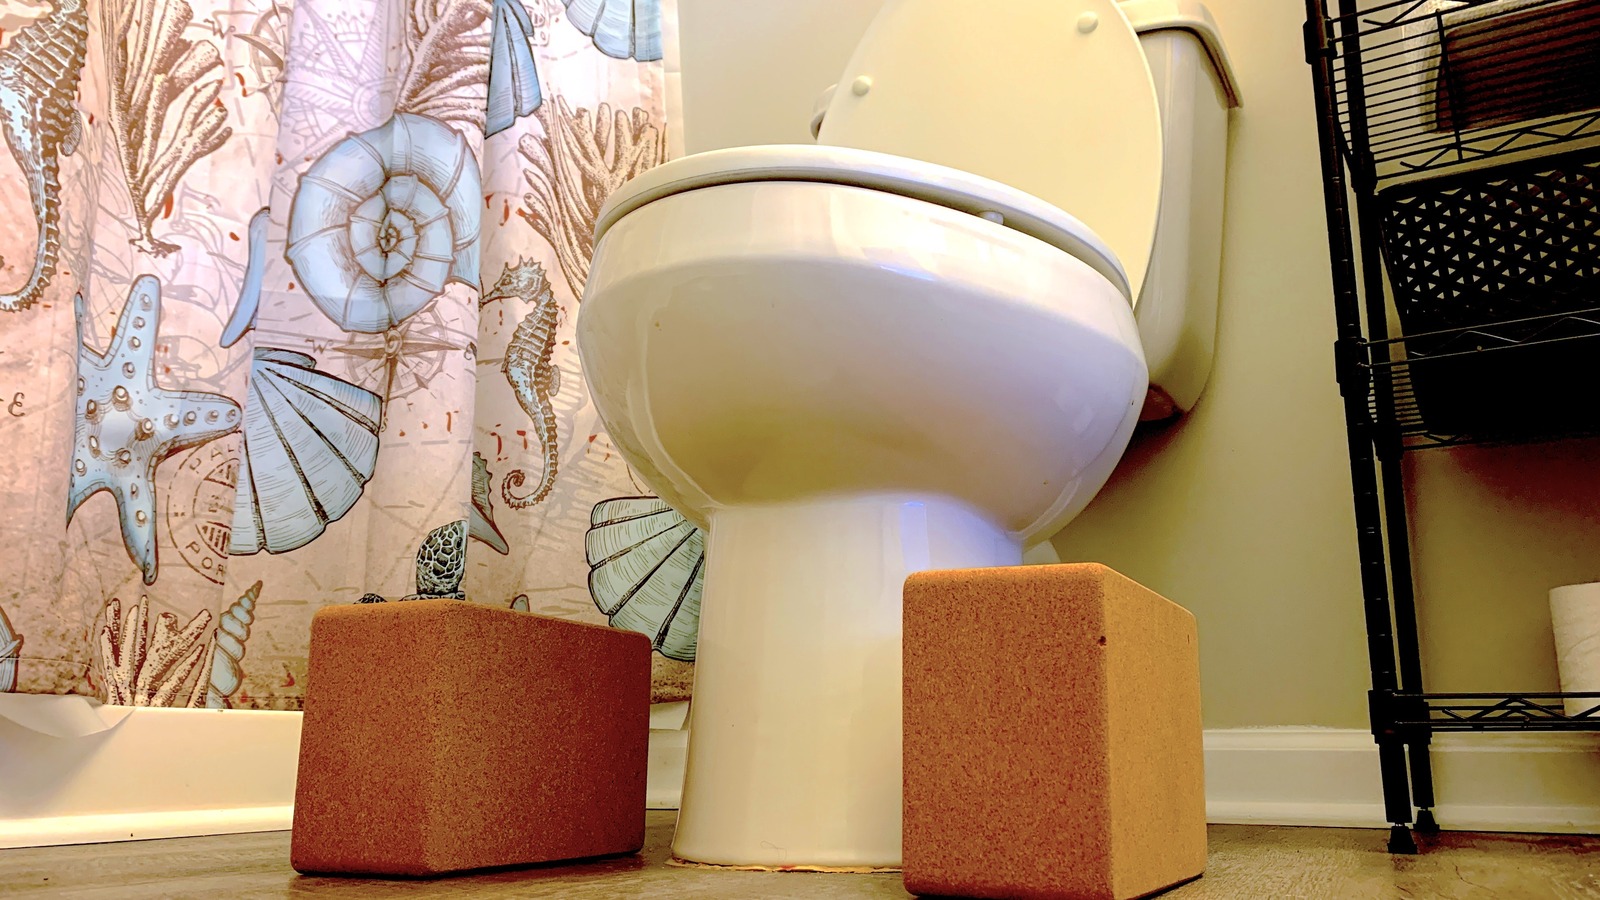 We Tried The Internet’s DIY Squatty Potty To Poop Instantly. Here’s How It Went – Health Digest